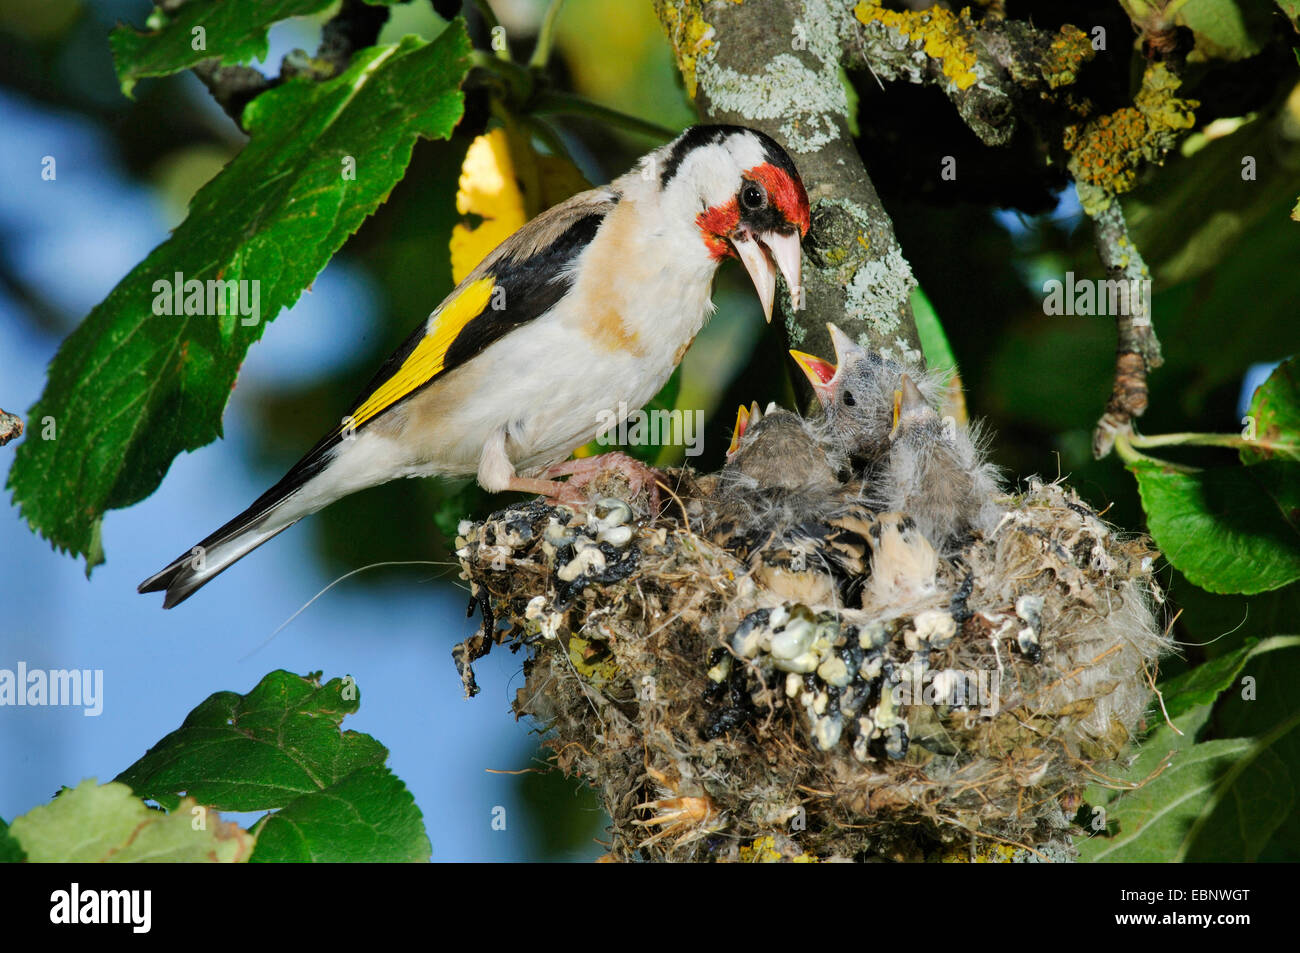 Eurasian goldfinch (Carduelis carduelis), feeding its chick in the nest, Germany, Baden-Wuerttemberg Stock Photo